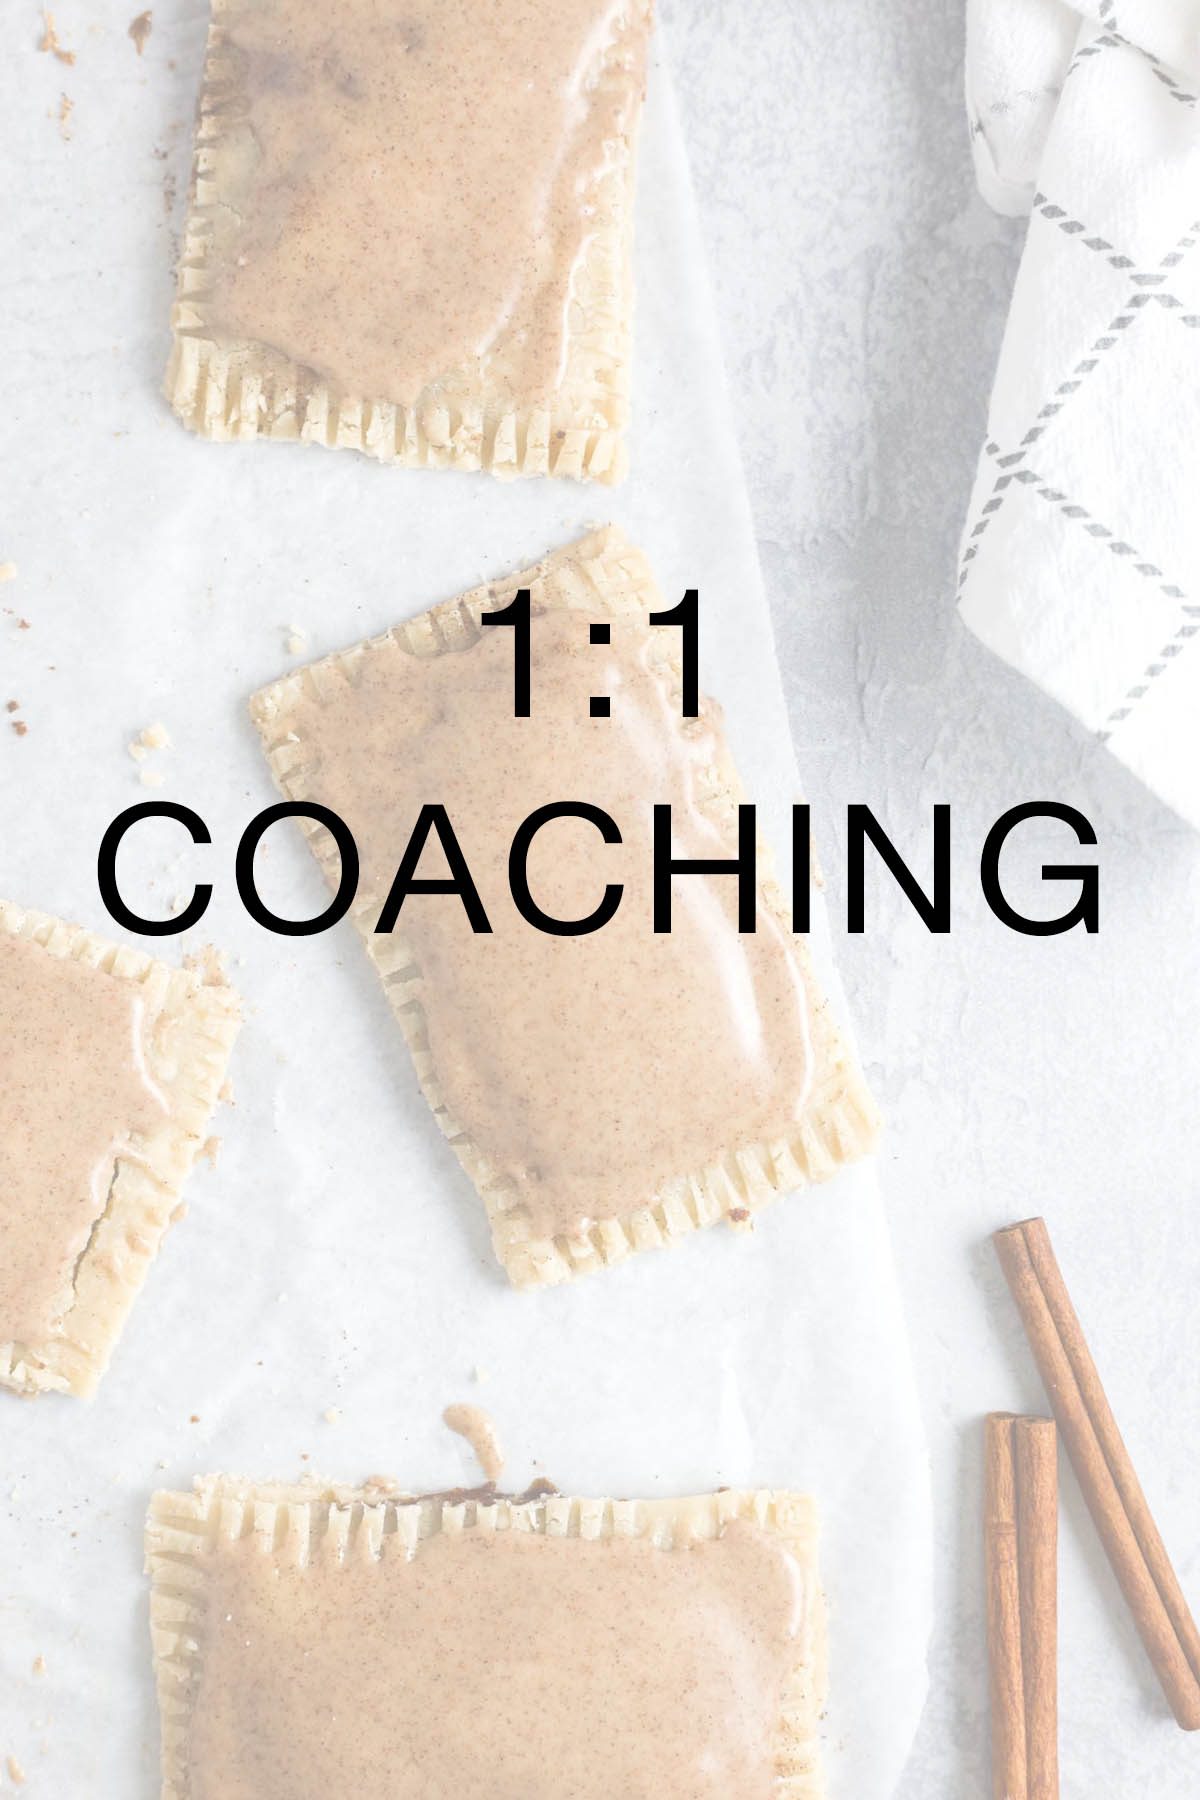 vegan pop tarts with "1:1 coaching" over the image.